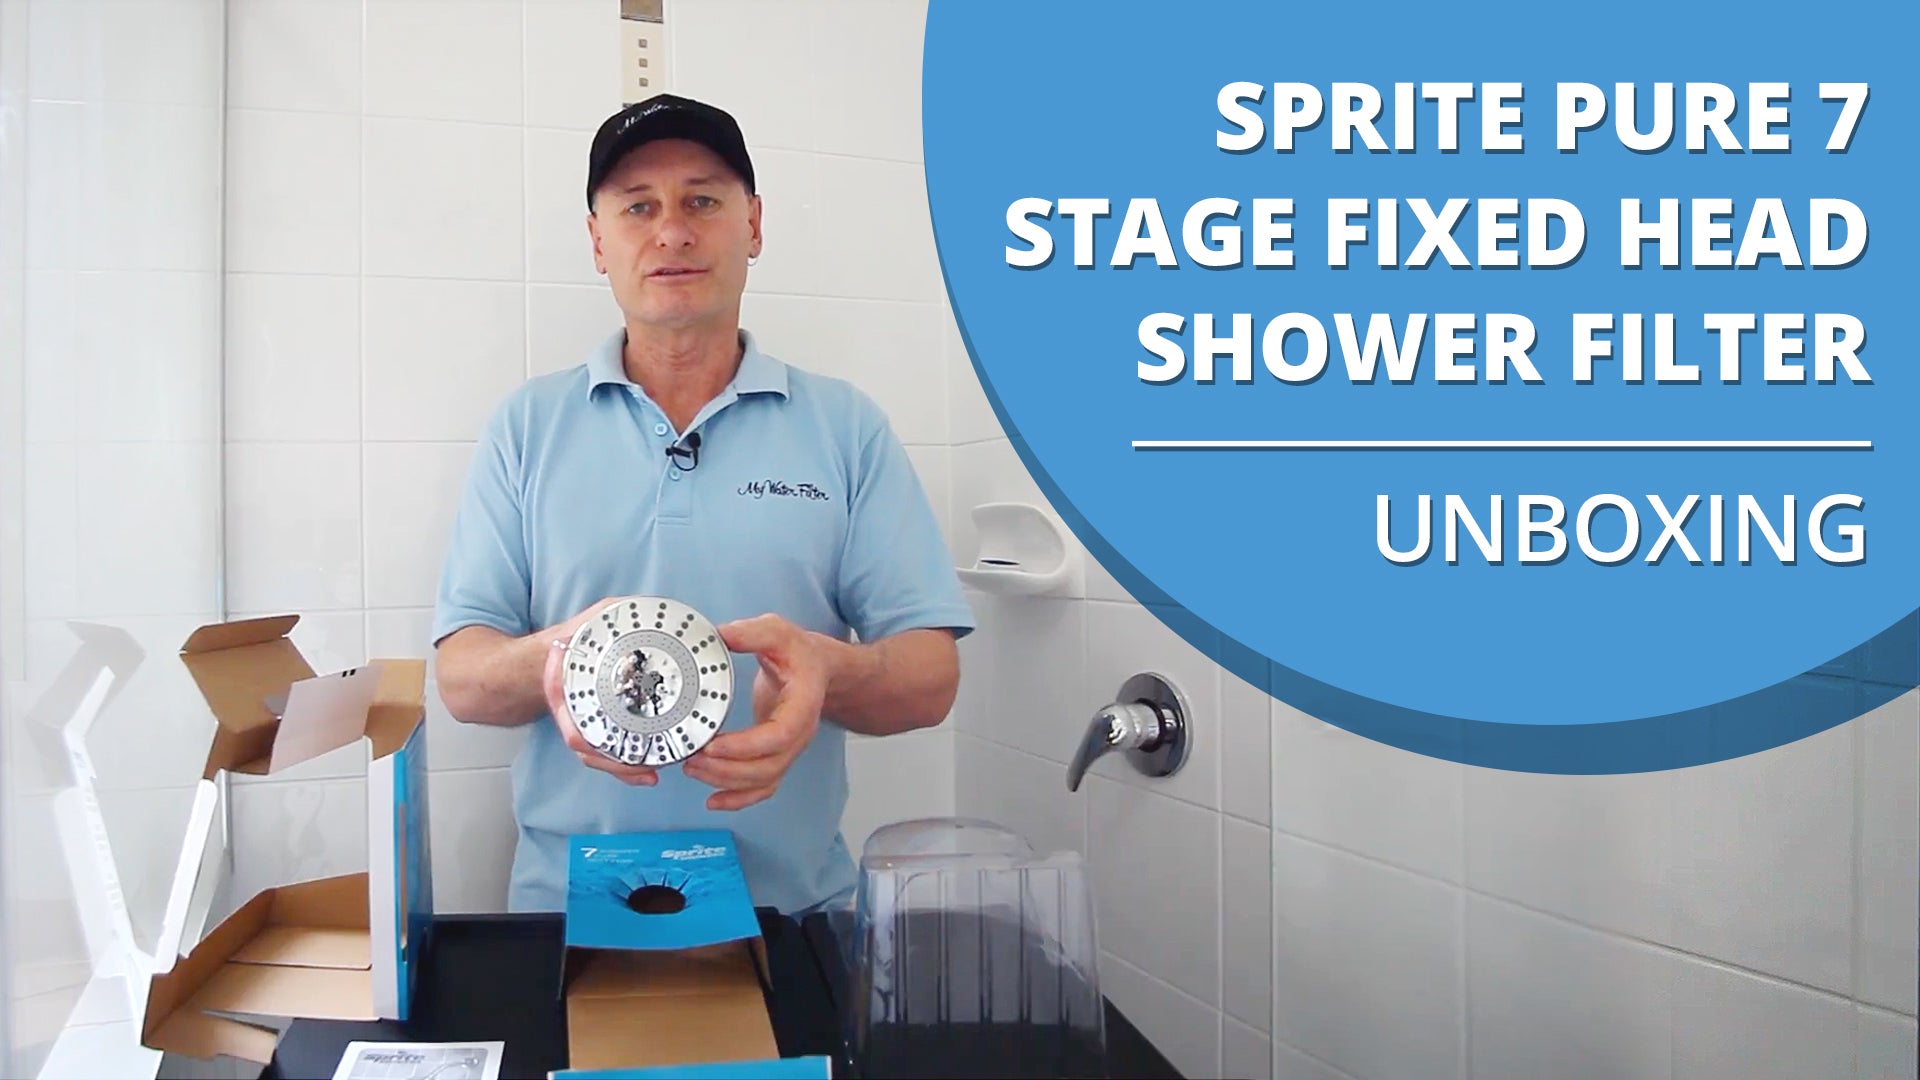 Sprite Shower Pure 7 Stage Fixed Head Shower Filter Unboxing